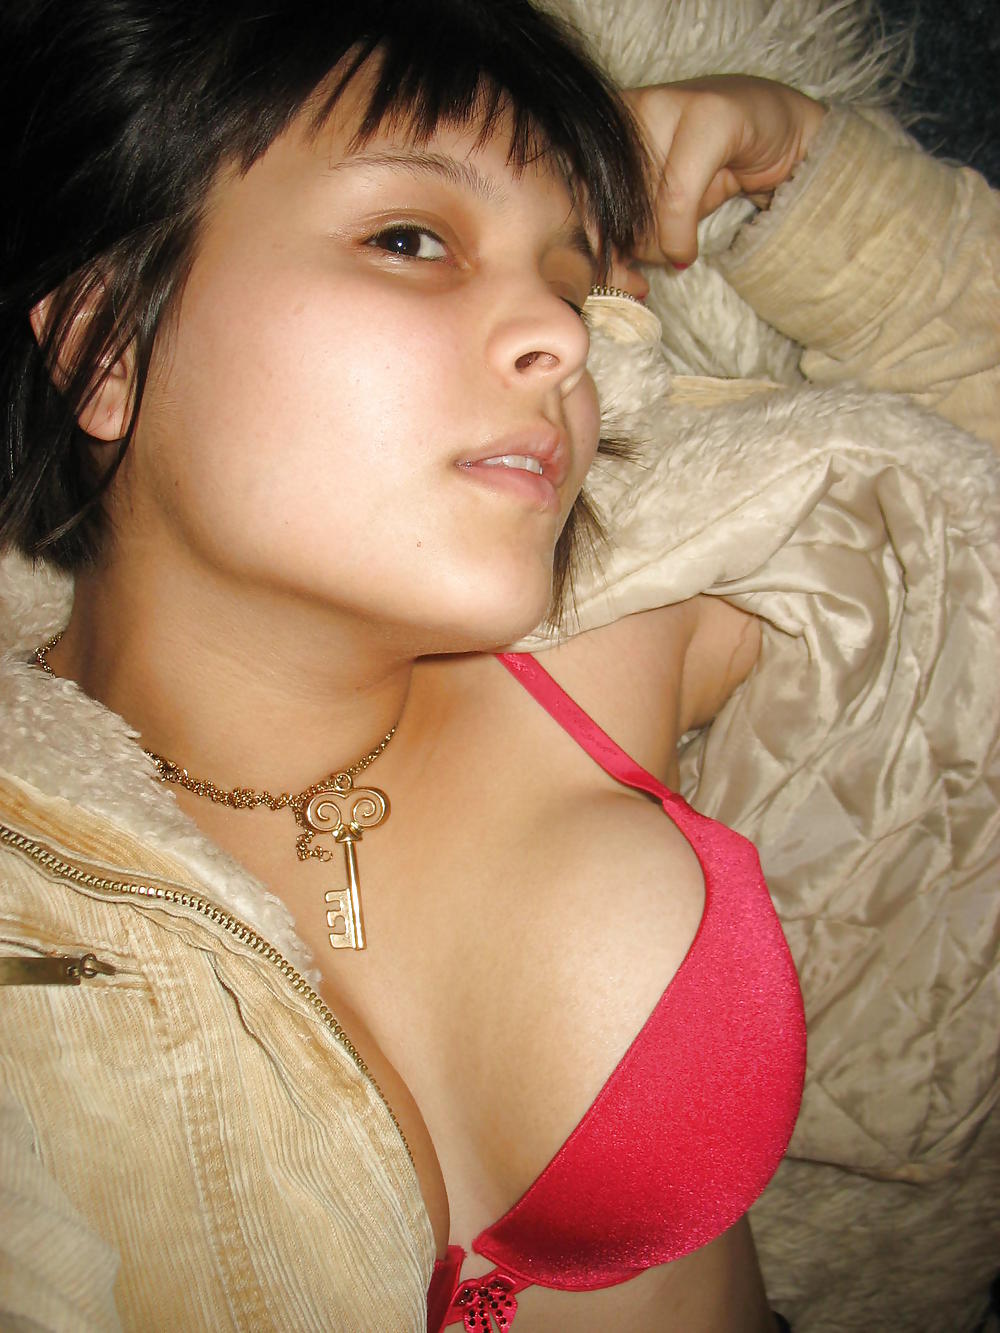 The Beauty of Amateur Latino Big Tits Teen porn gallery